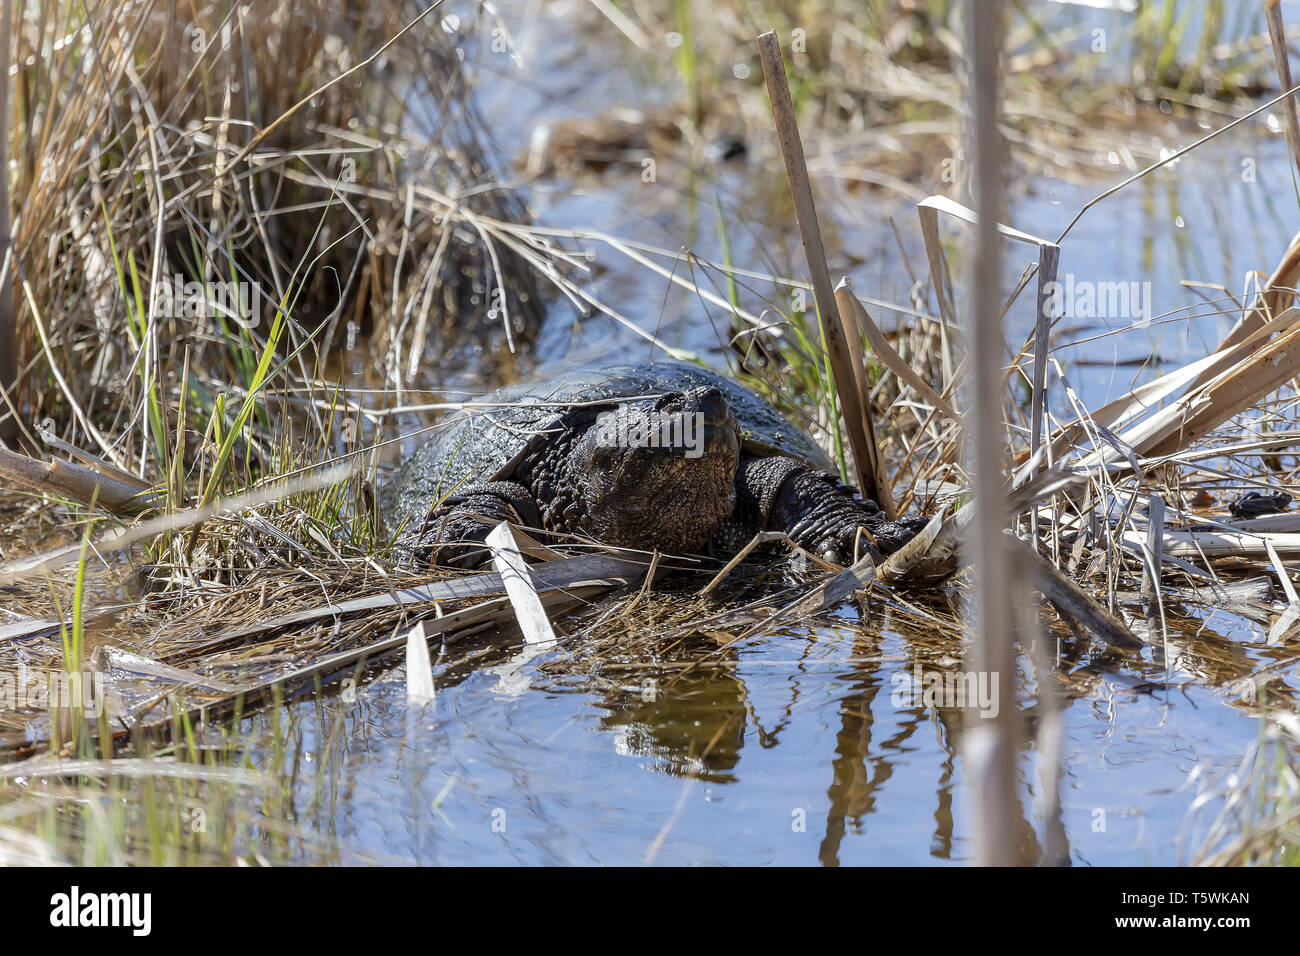 Old Common snapping turtle (Chelydra serpentina) in the conservation wildlife area in Wisconsin. Stock Photo